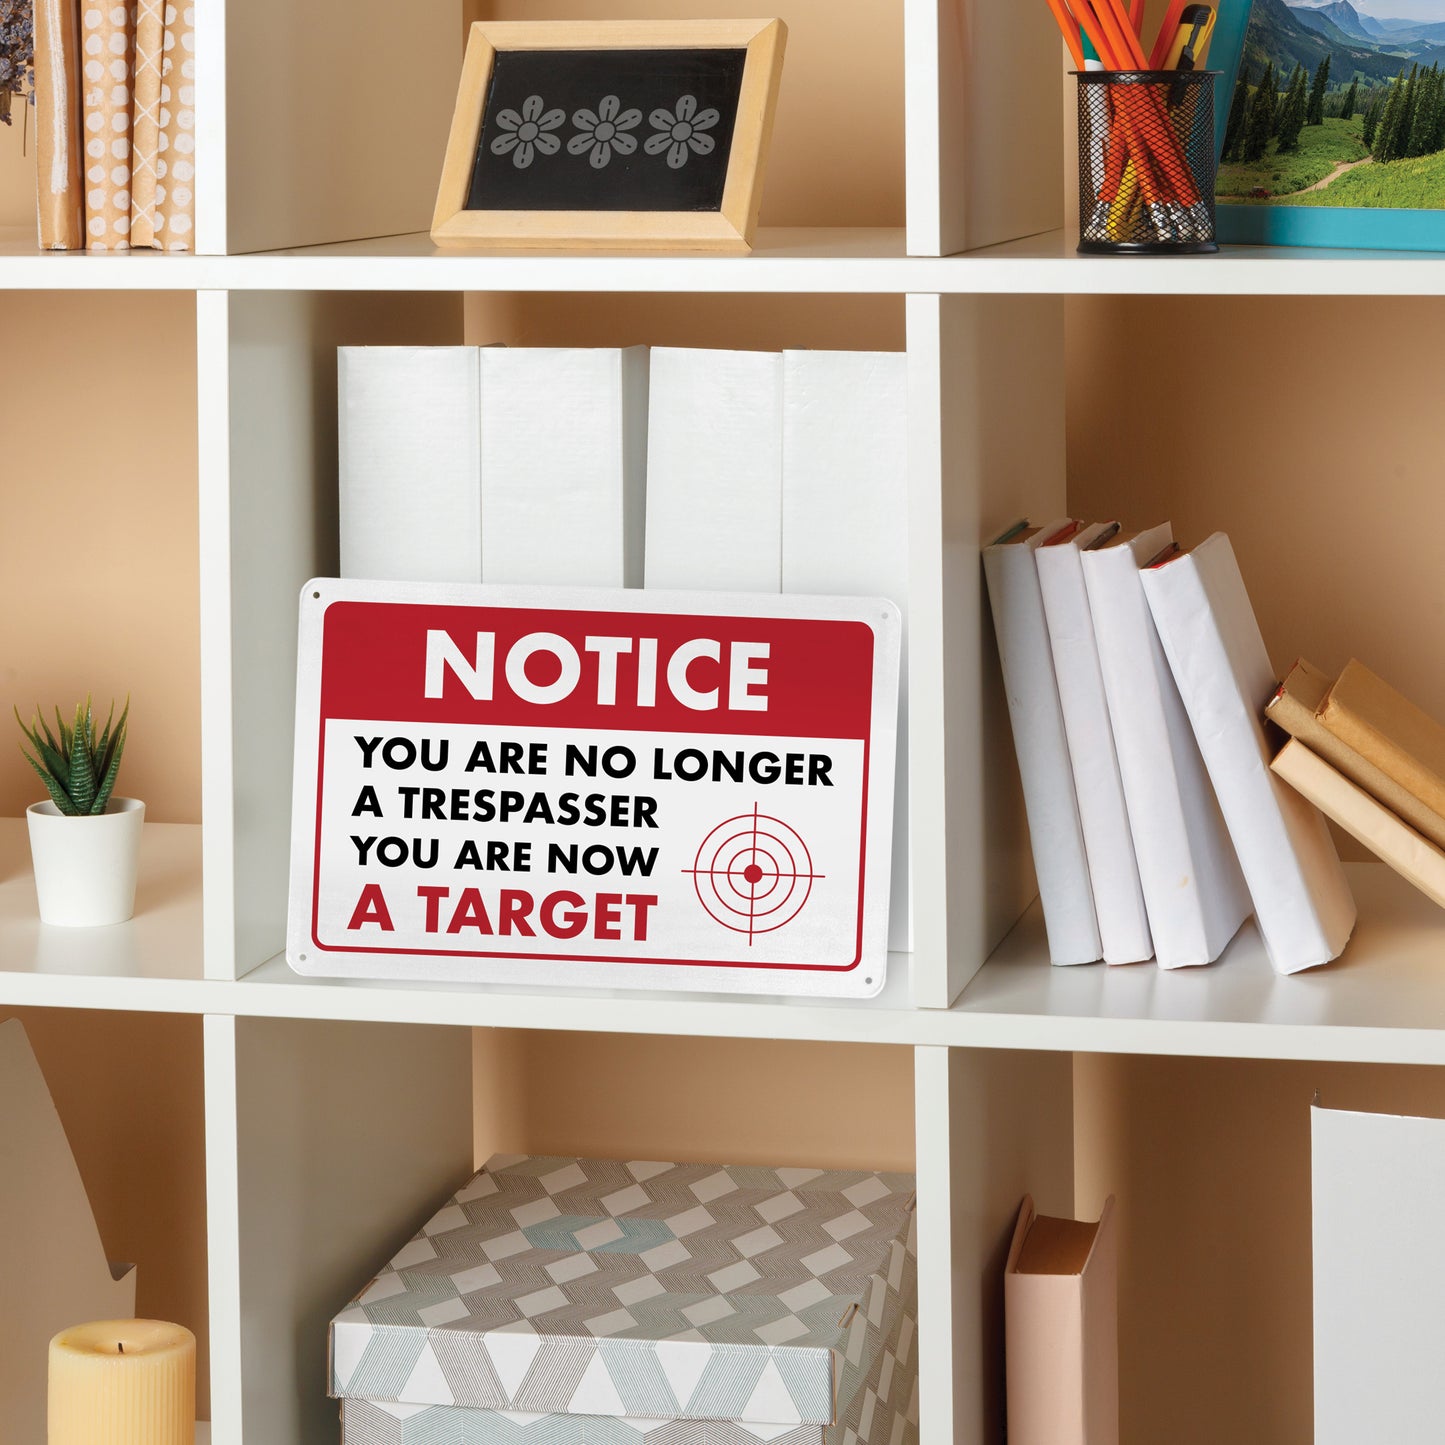 Notice - You are No Longer a Trespasser You are Now a Target - 8" x 12" Funny Metal Sign